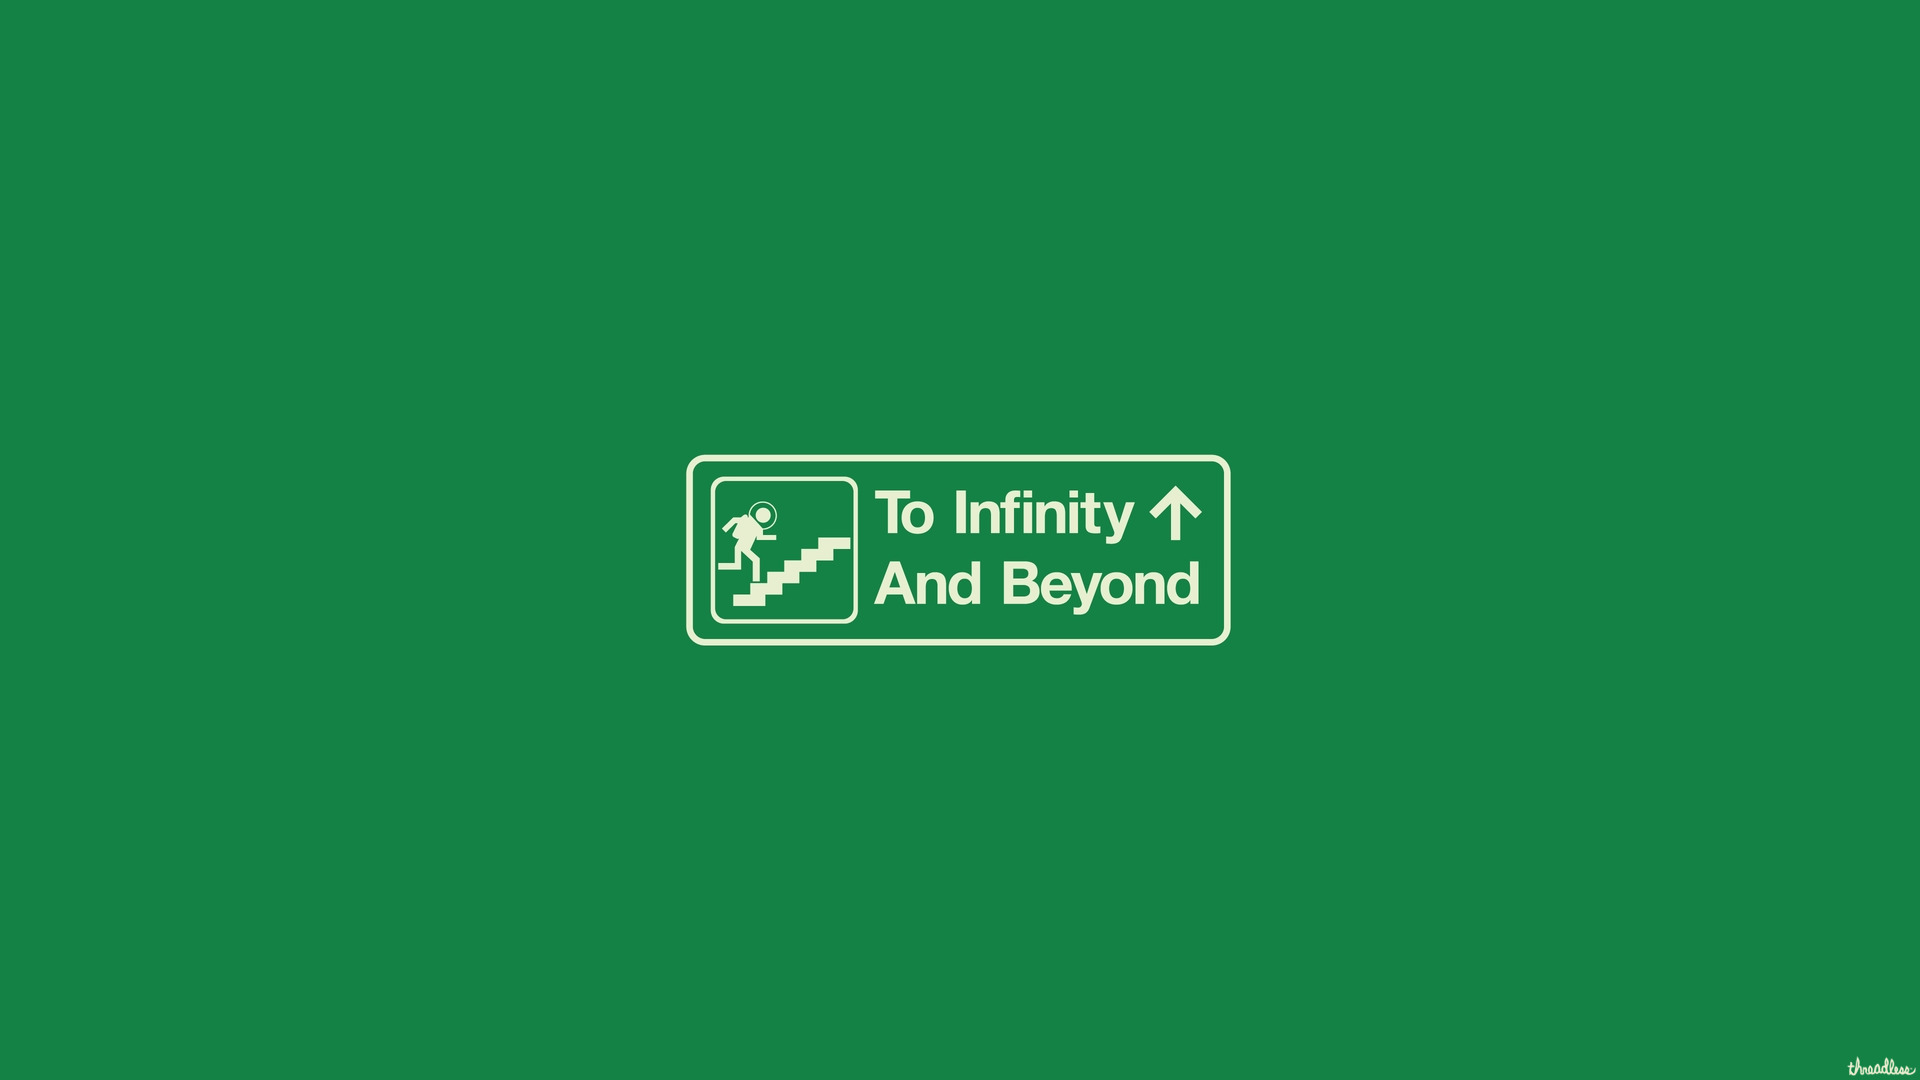 simple, Minimalism, Green, Stairs, Infinity, Toy Story Wallpaper